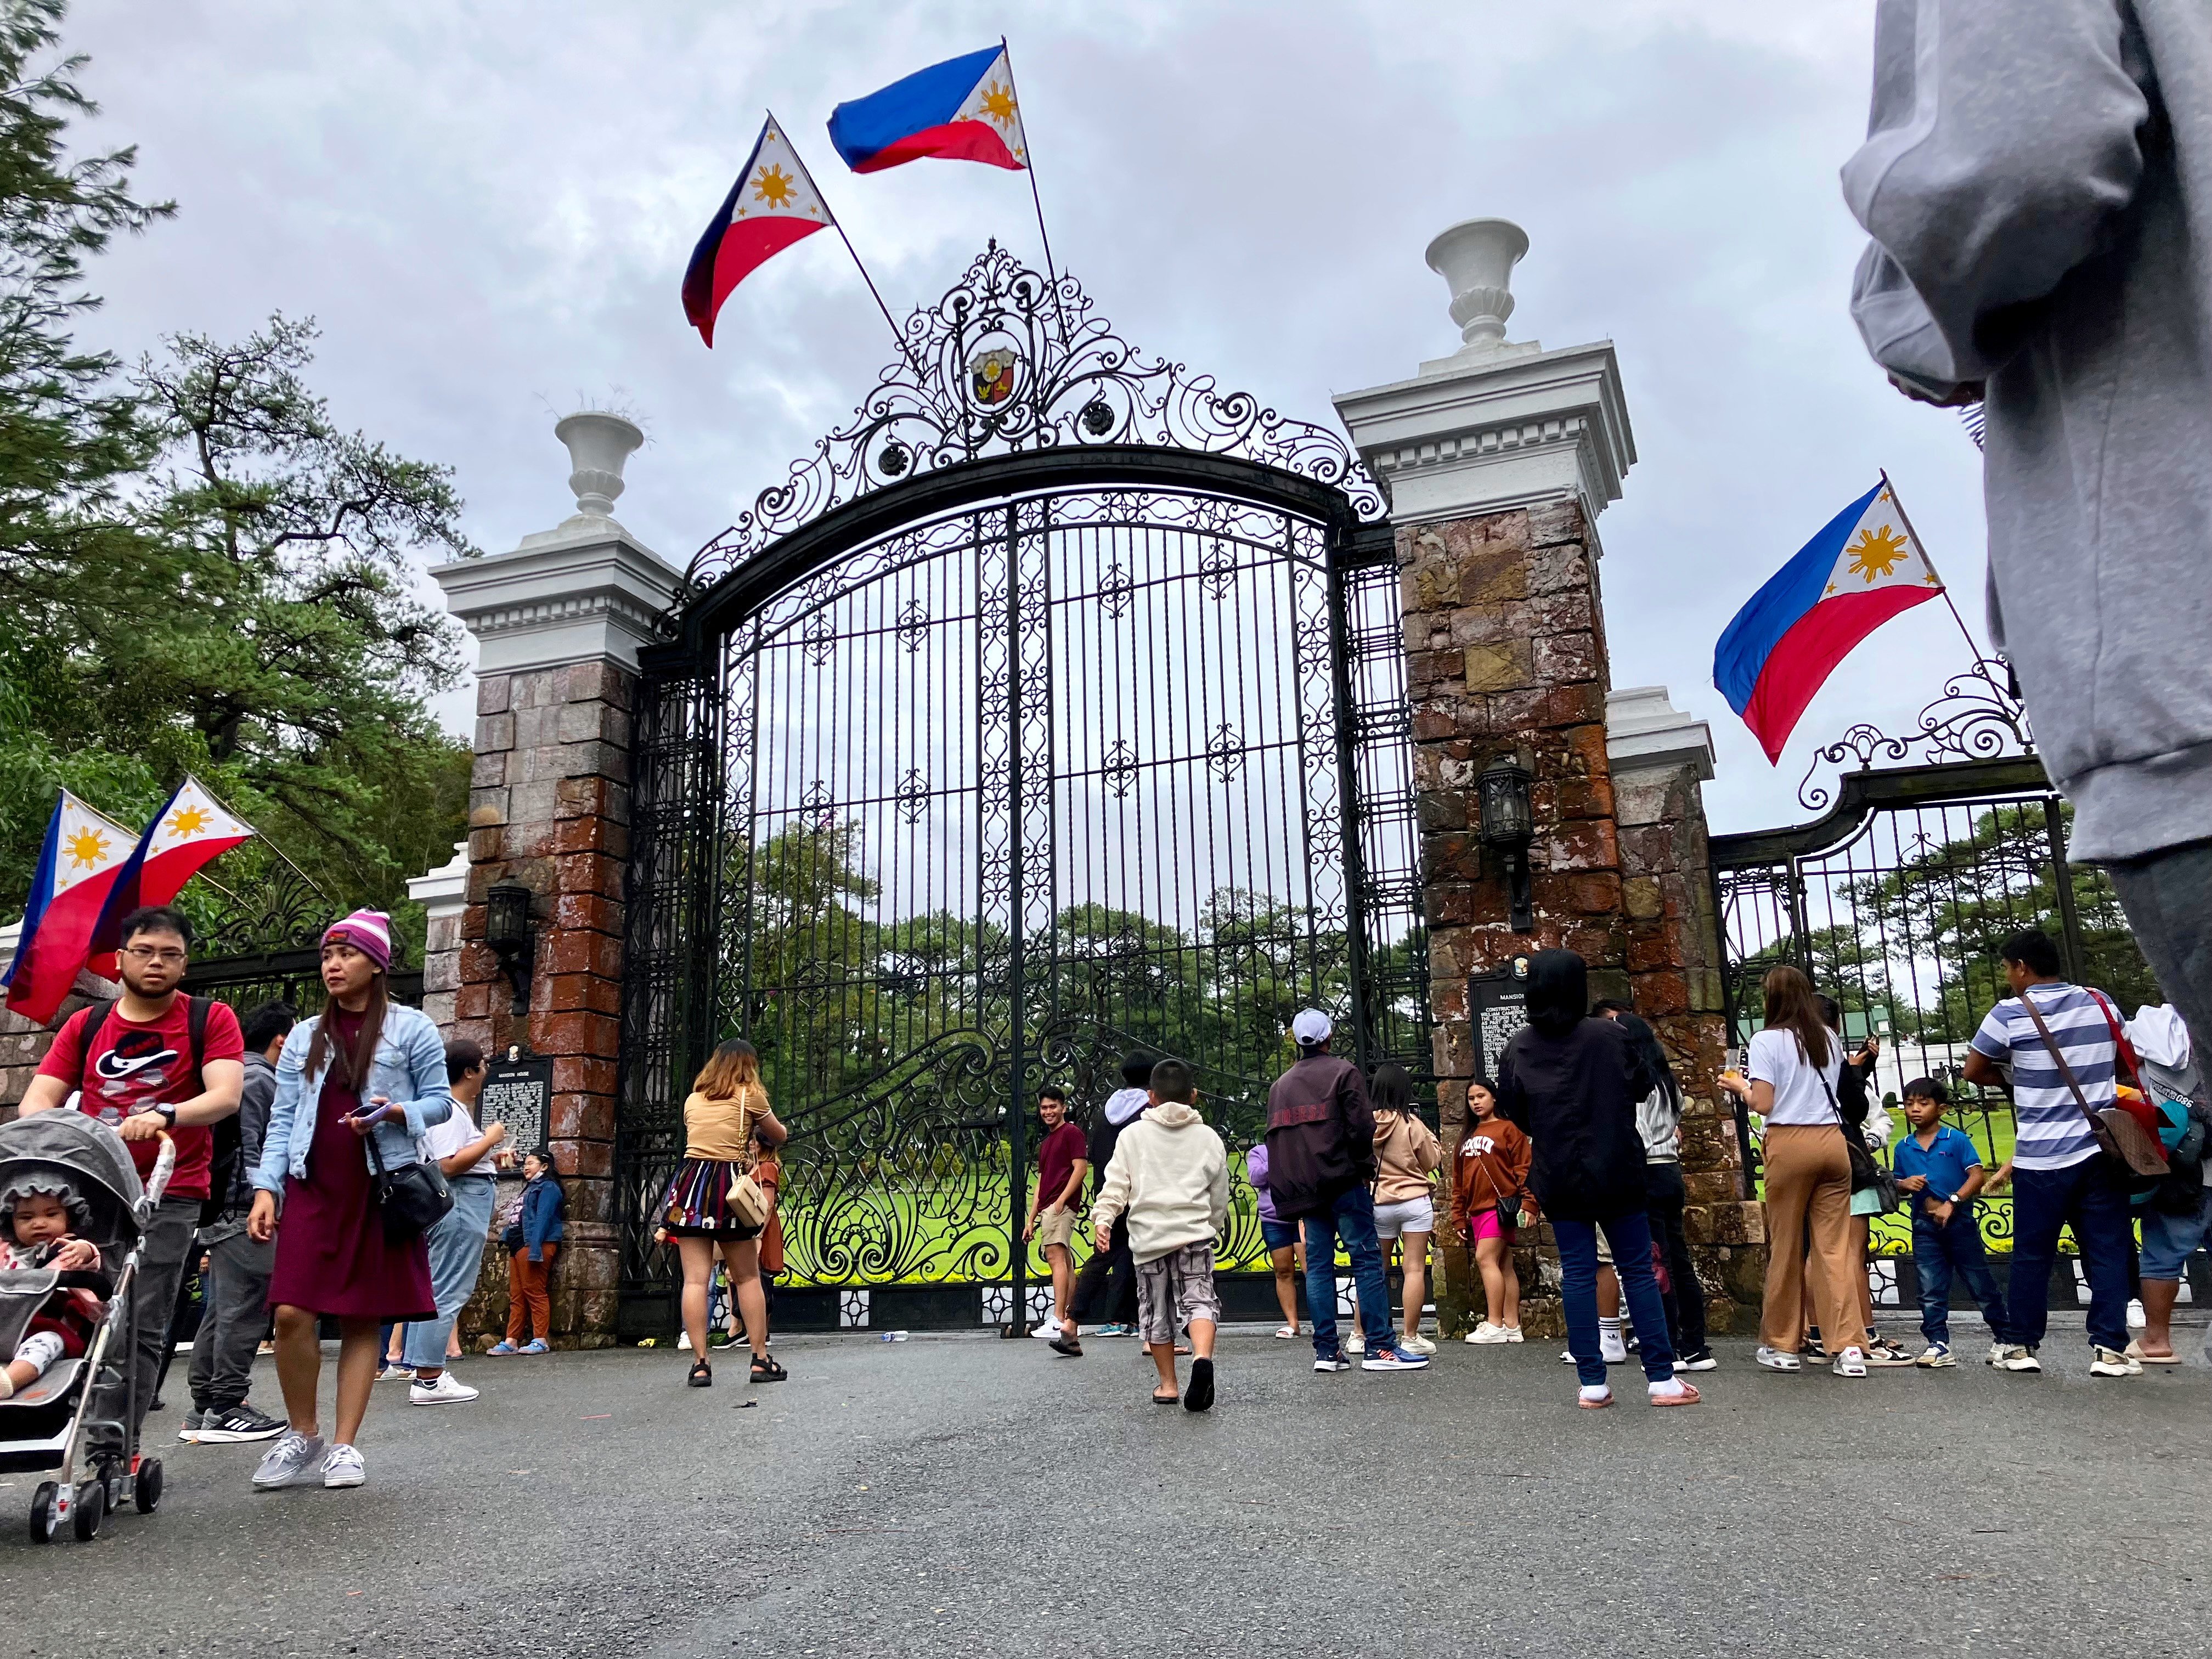 Tourists take pictures outside The Mansion in Baguio, Philippines. Photo: SCMP